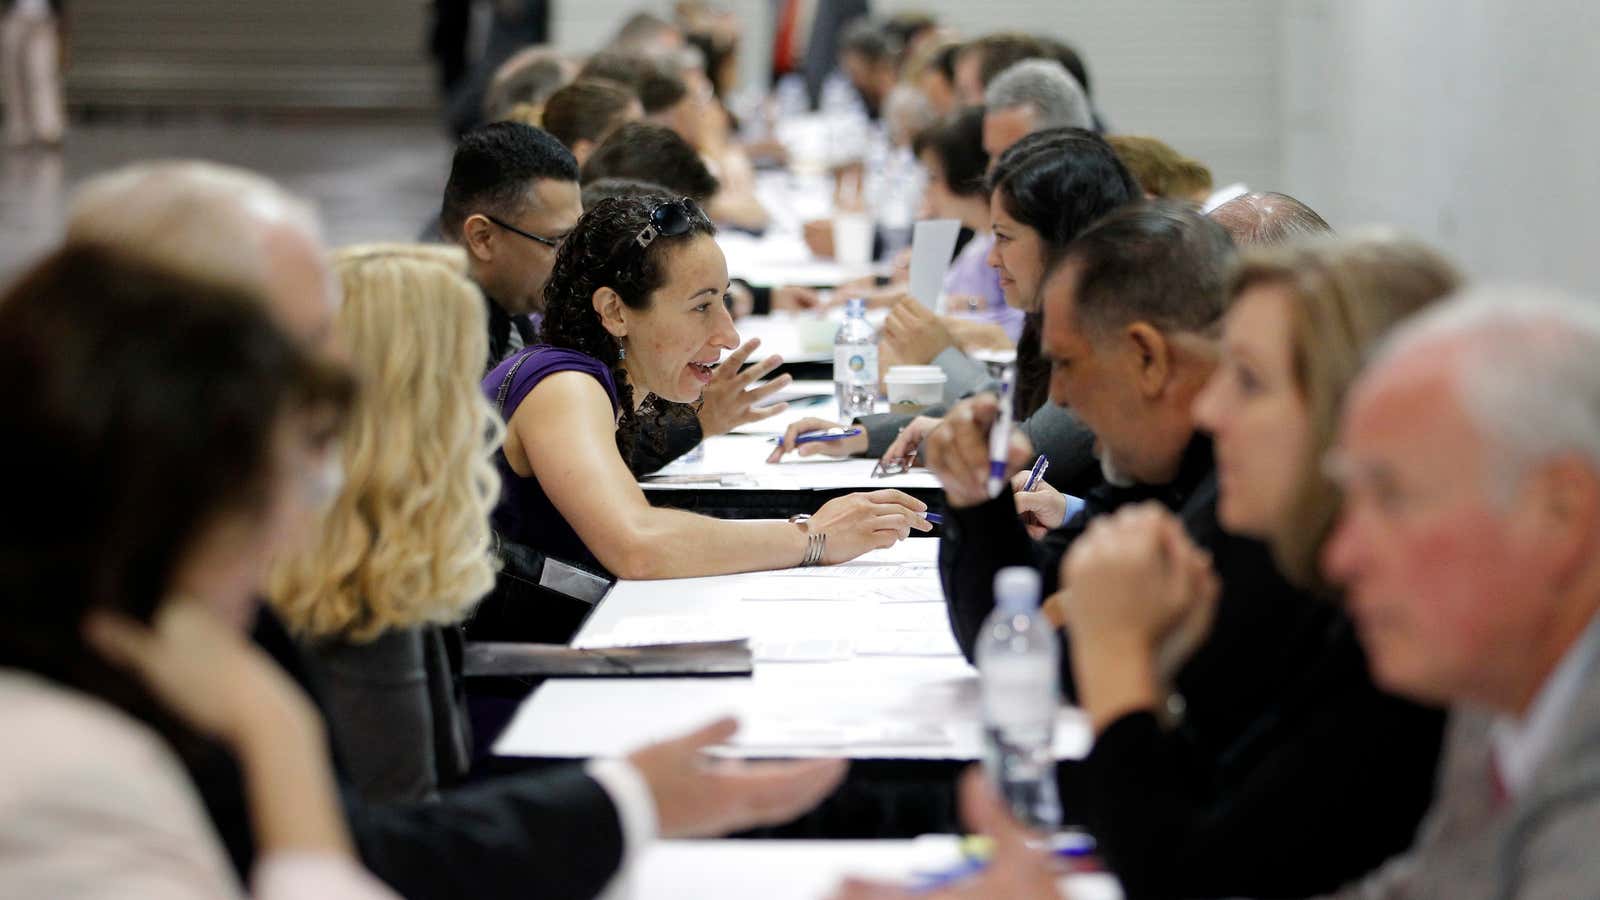 If you’re at a job fair, you may already be in trouble.